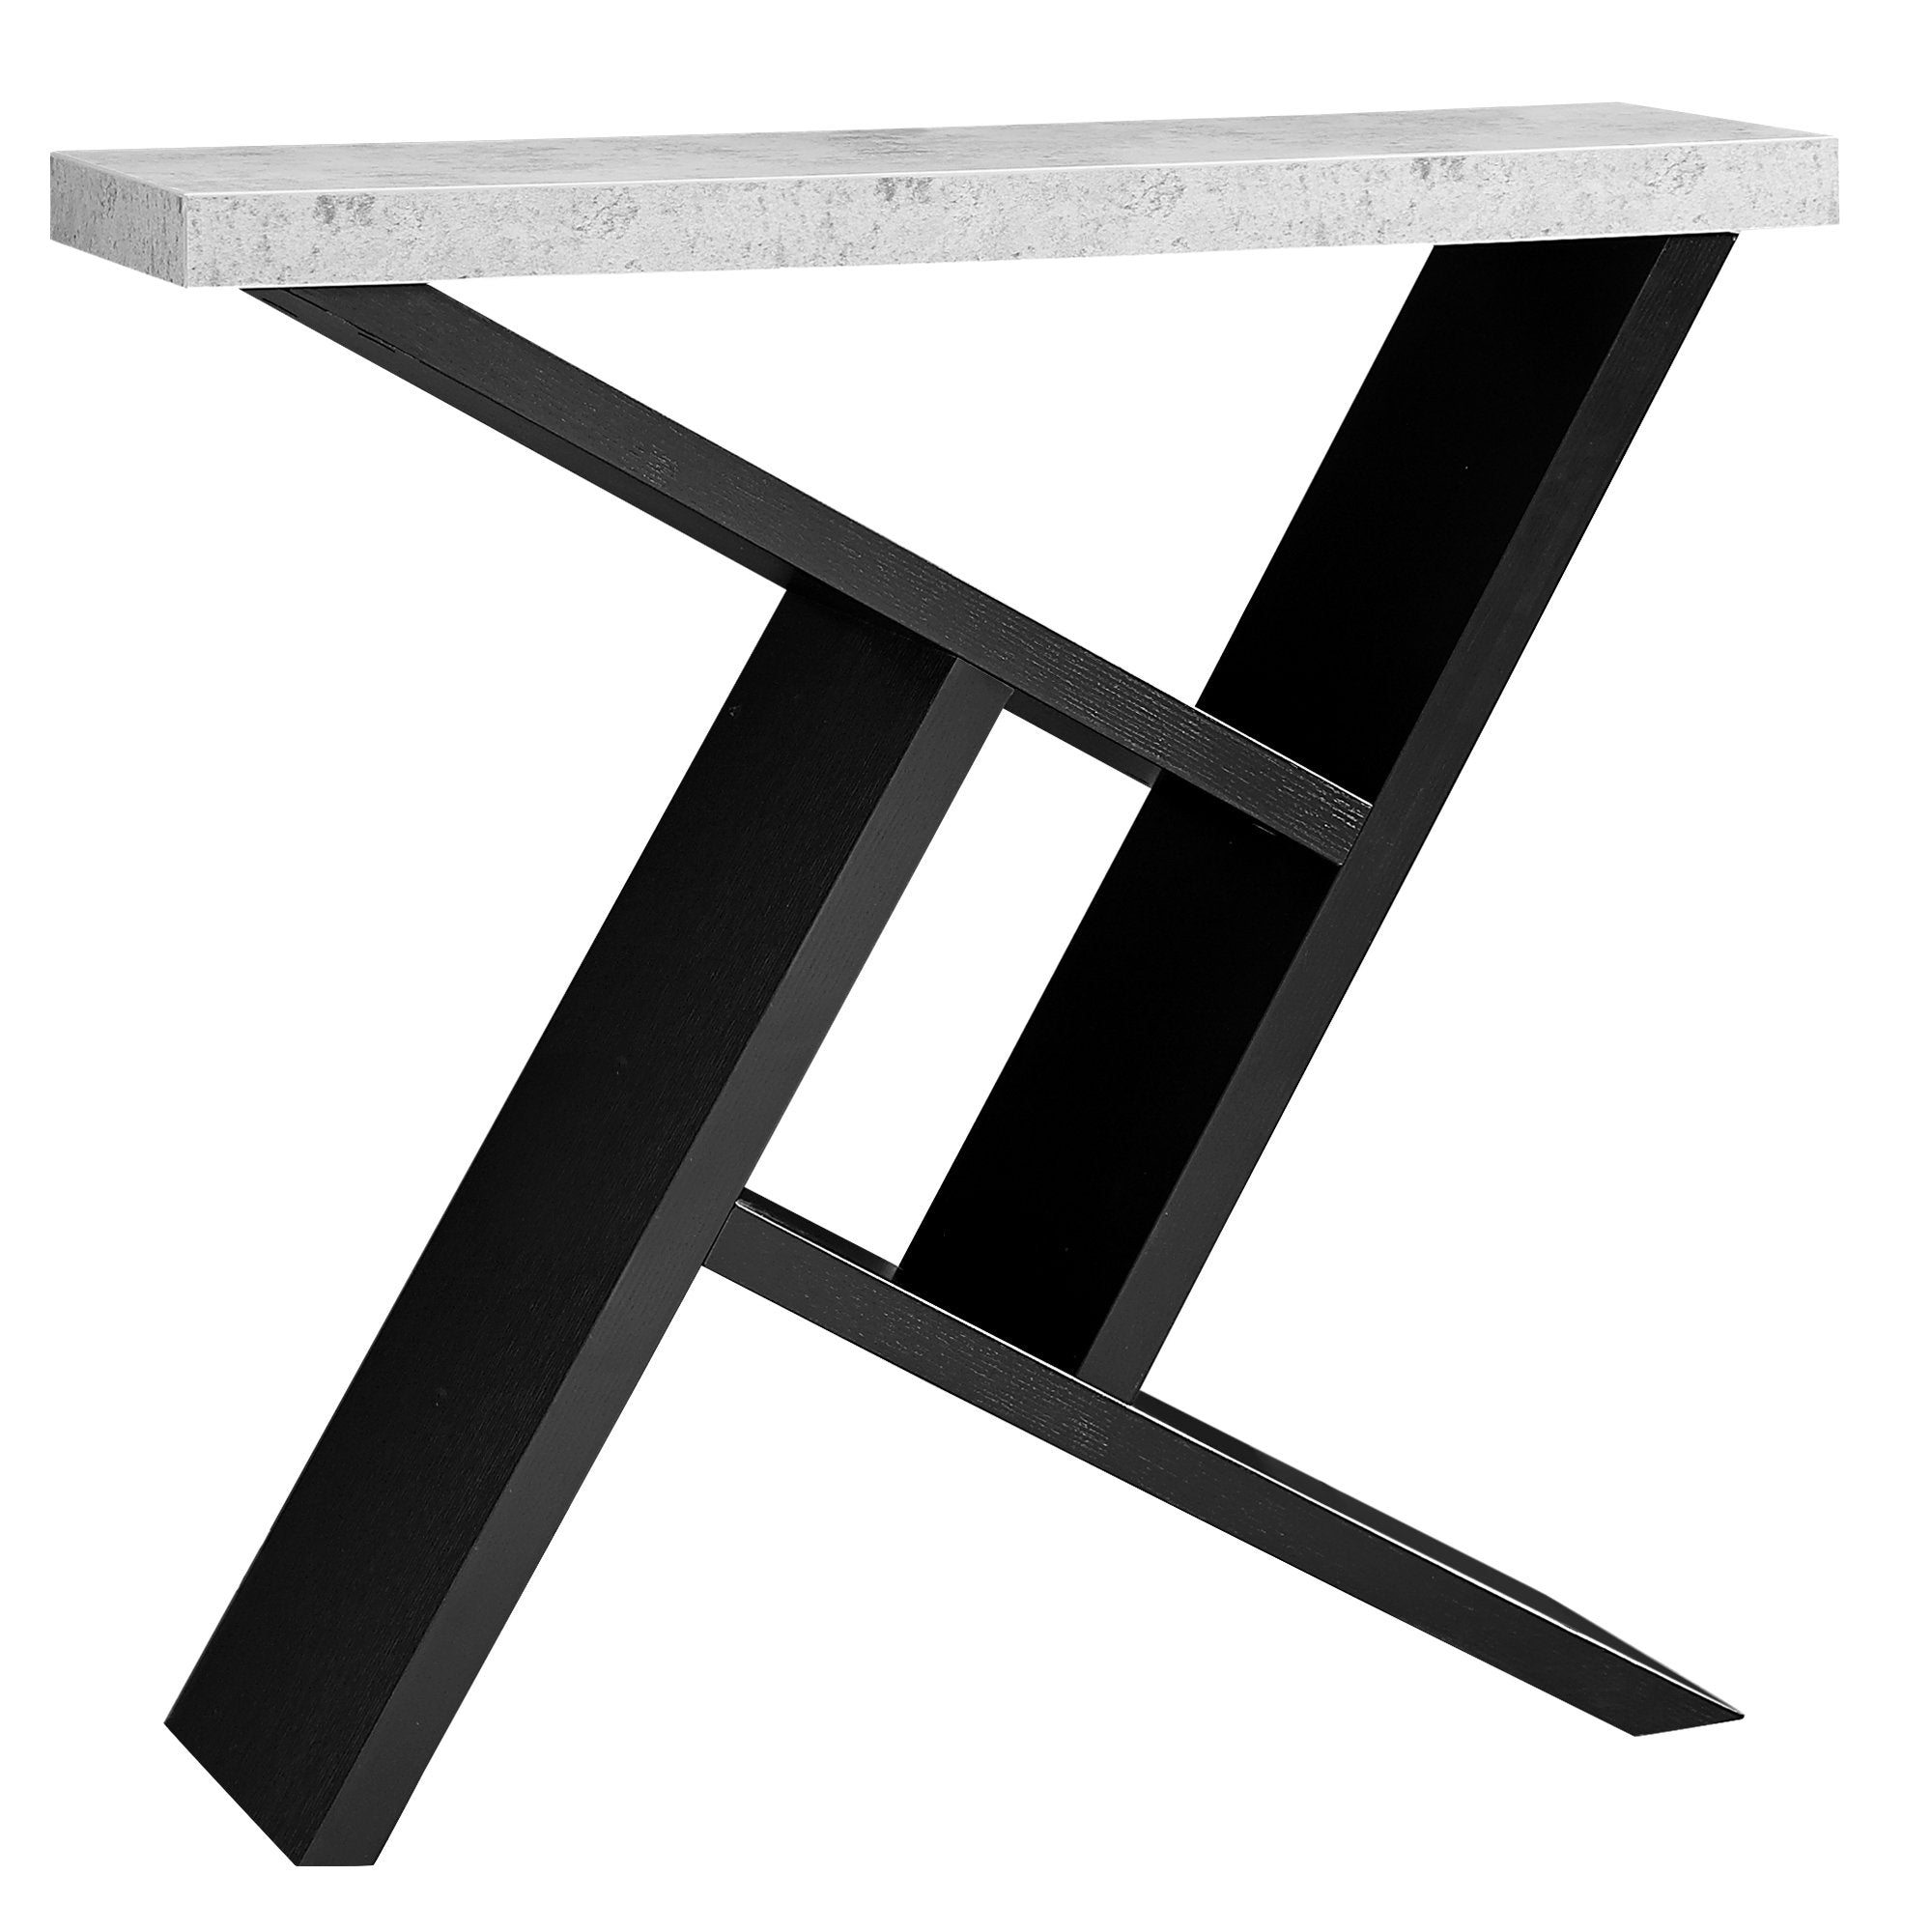 MN-902406    Accent Table, Console, Entryway, Narrow, Sofa, Living Room, Bedroom, Laminate, Grey Cement Look, Black, Contemporary, Modern